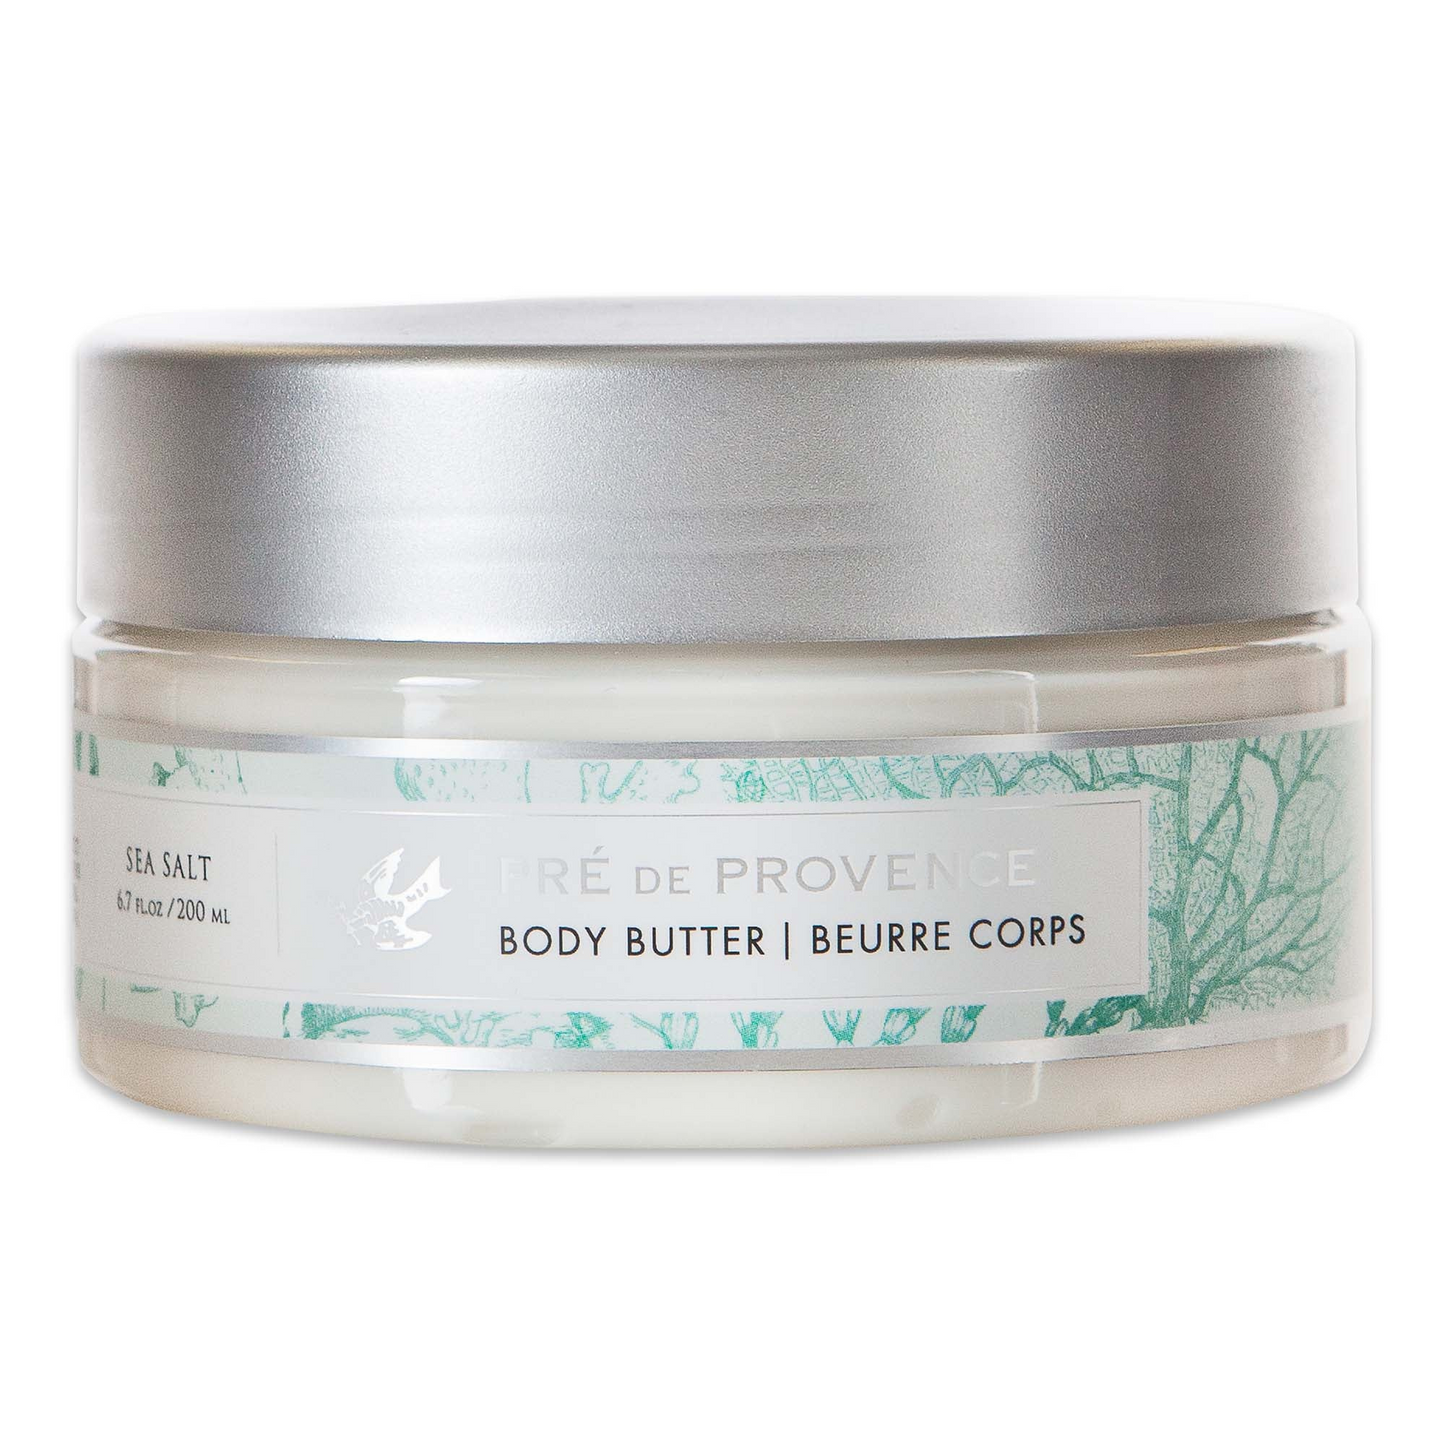 Primary Image of Body Butter - Sea Salt